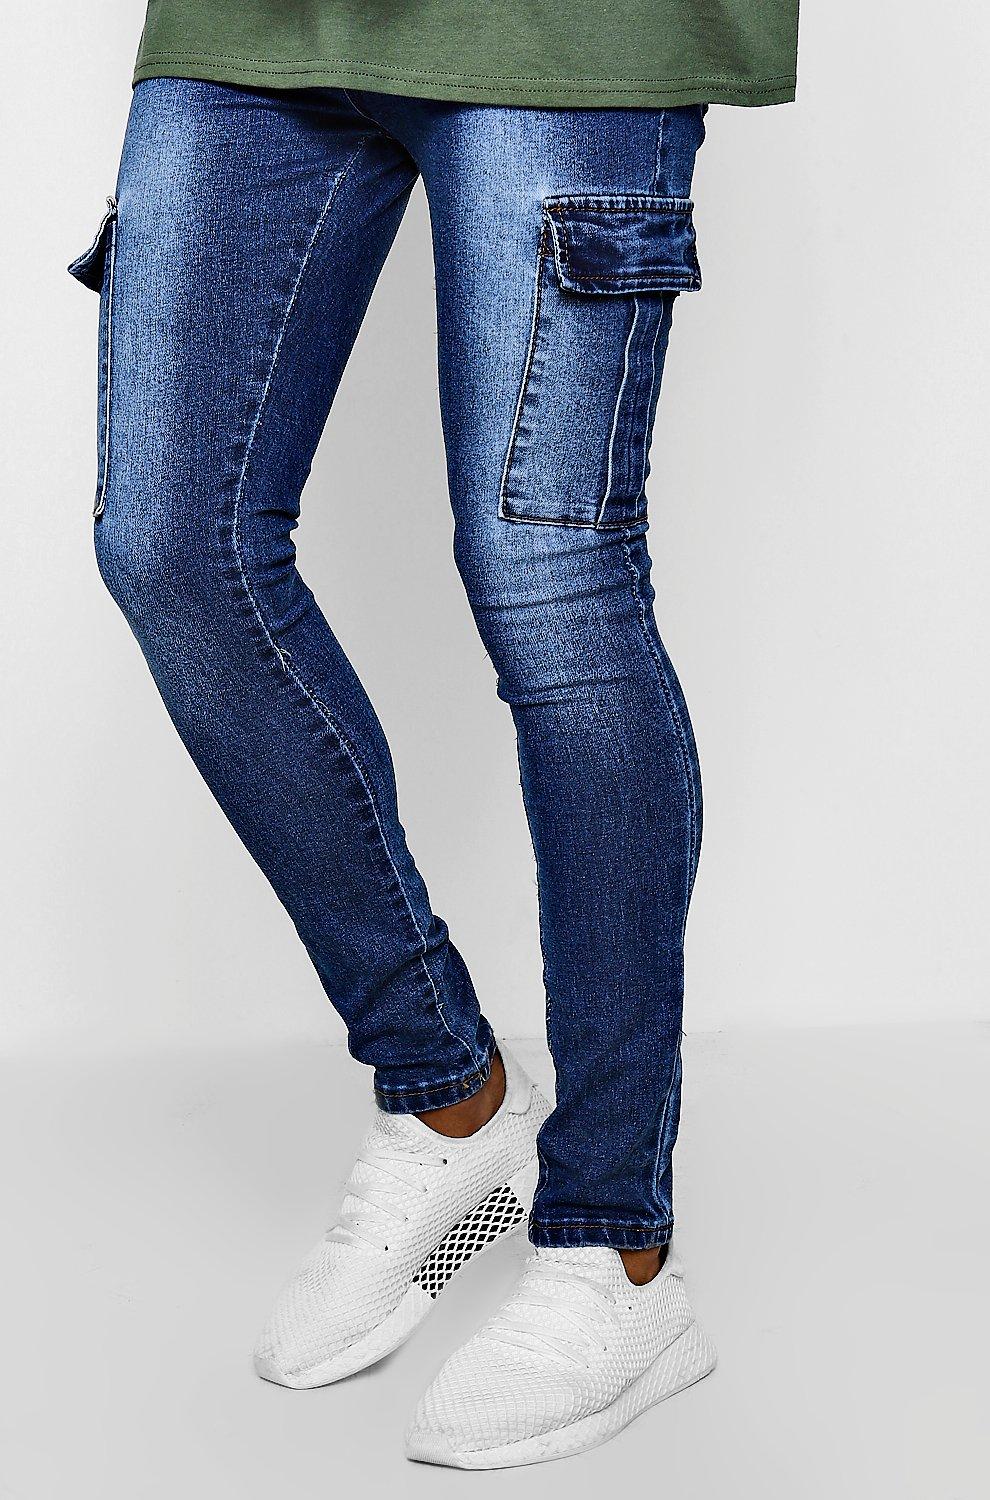 Super Skinny Jeans With Cargo Pockets 